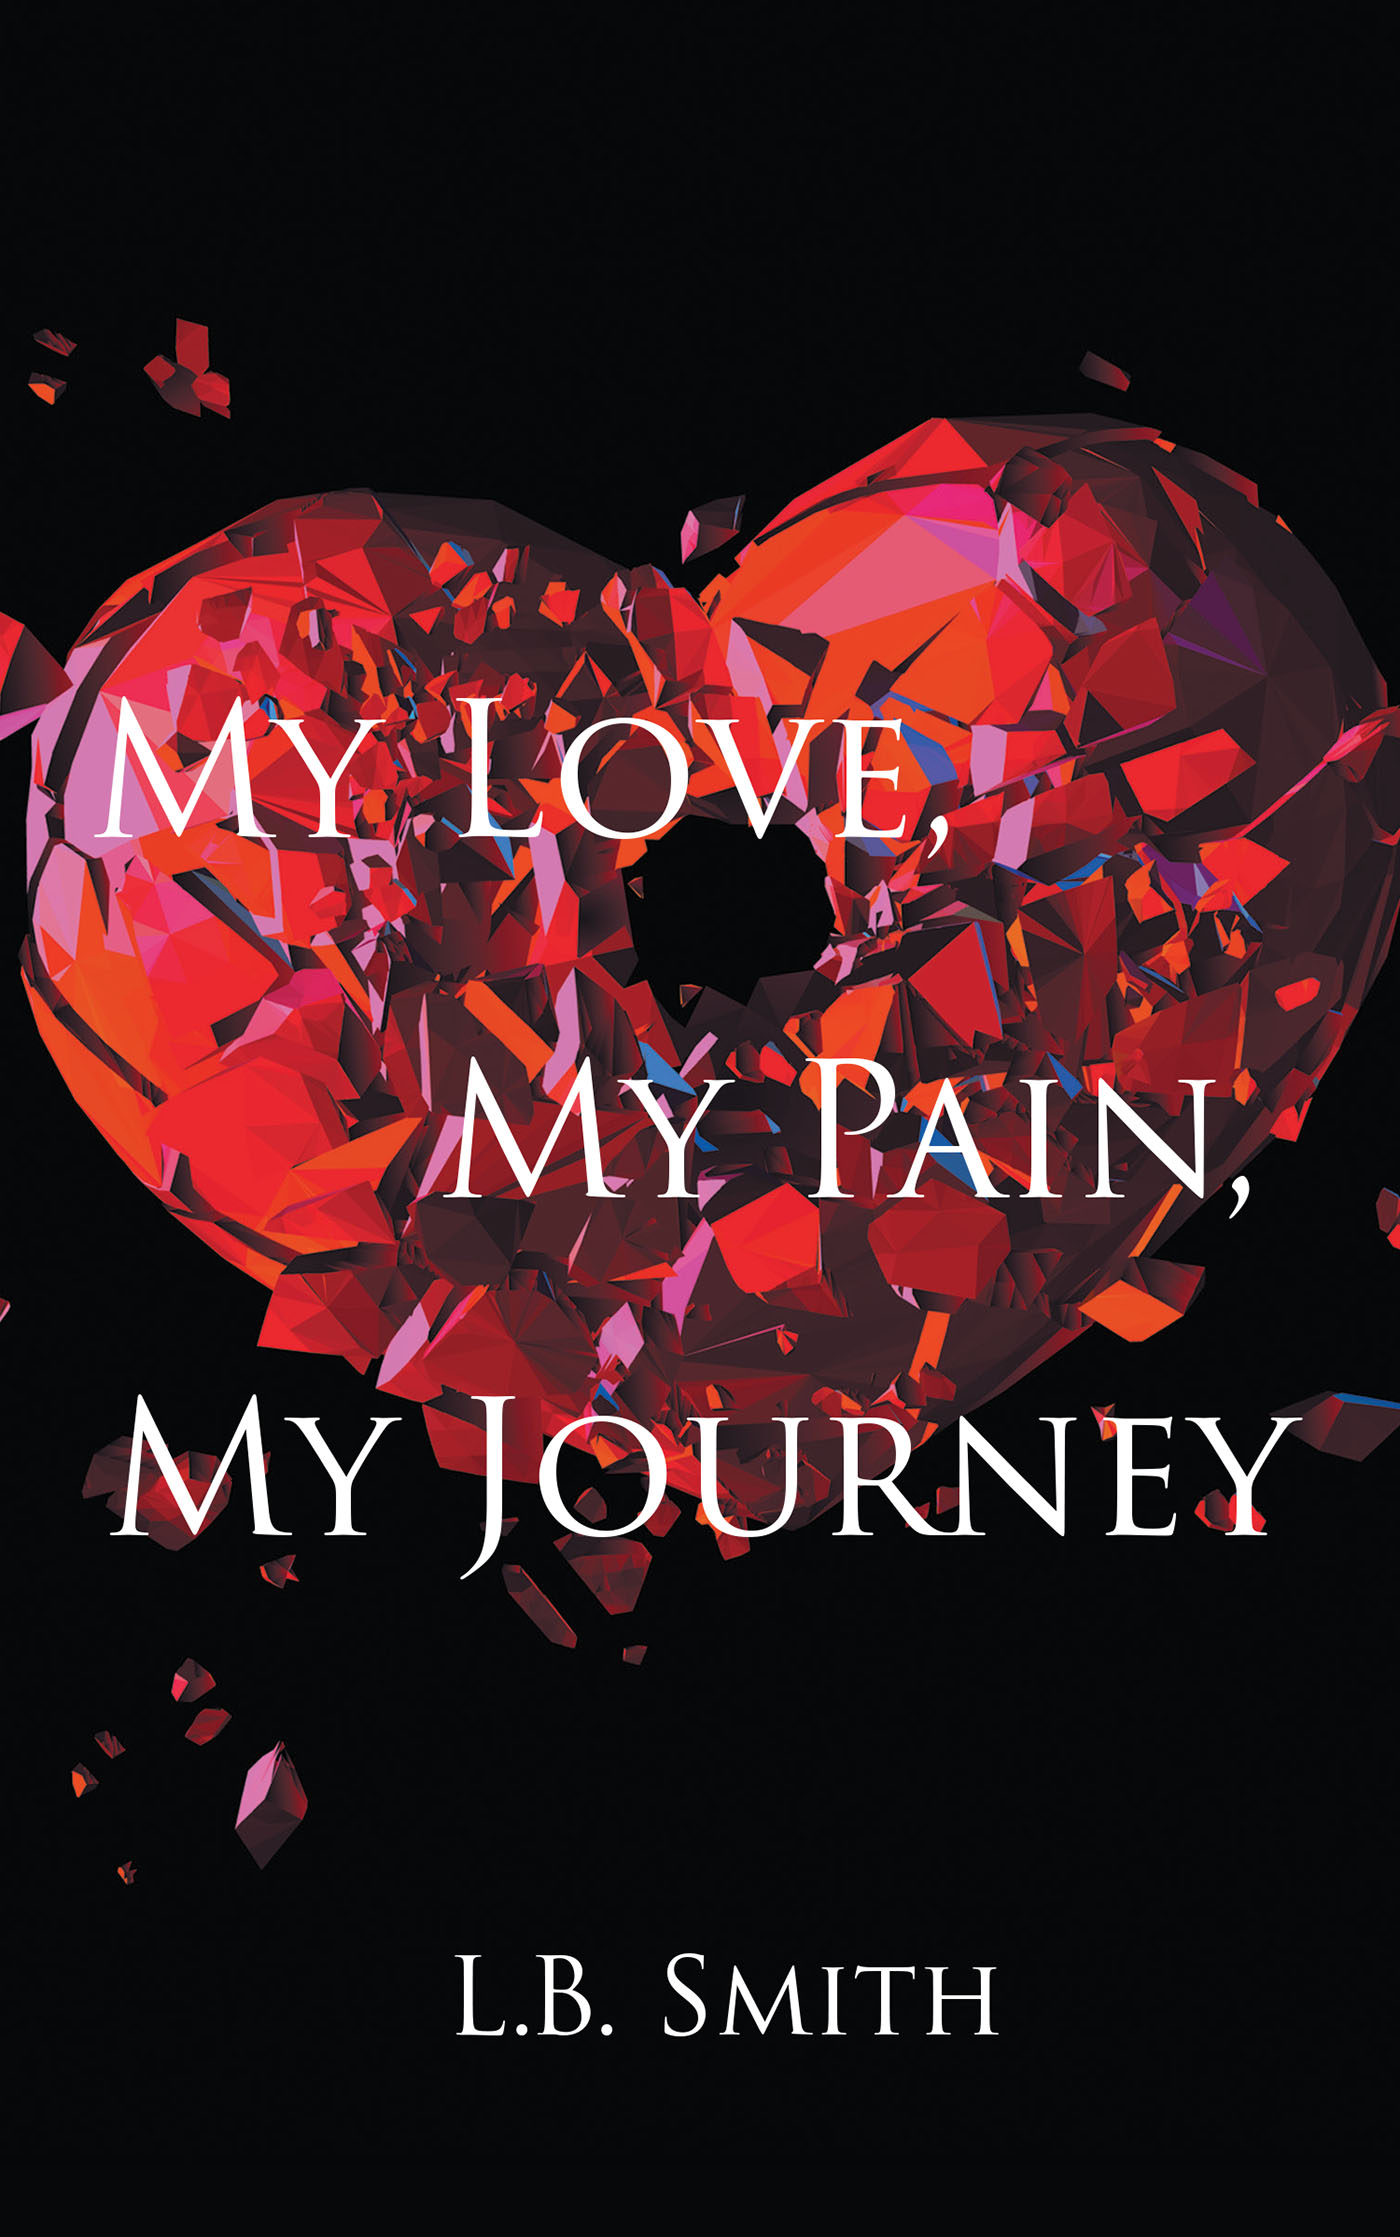 Author L.B. Smith’s New Book, "My Love, My Pain, My Journey," is a Brilliant Series of Poems Following the Author Through His Experiences with Love and Loss